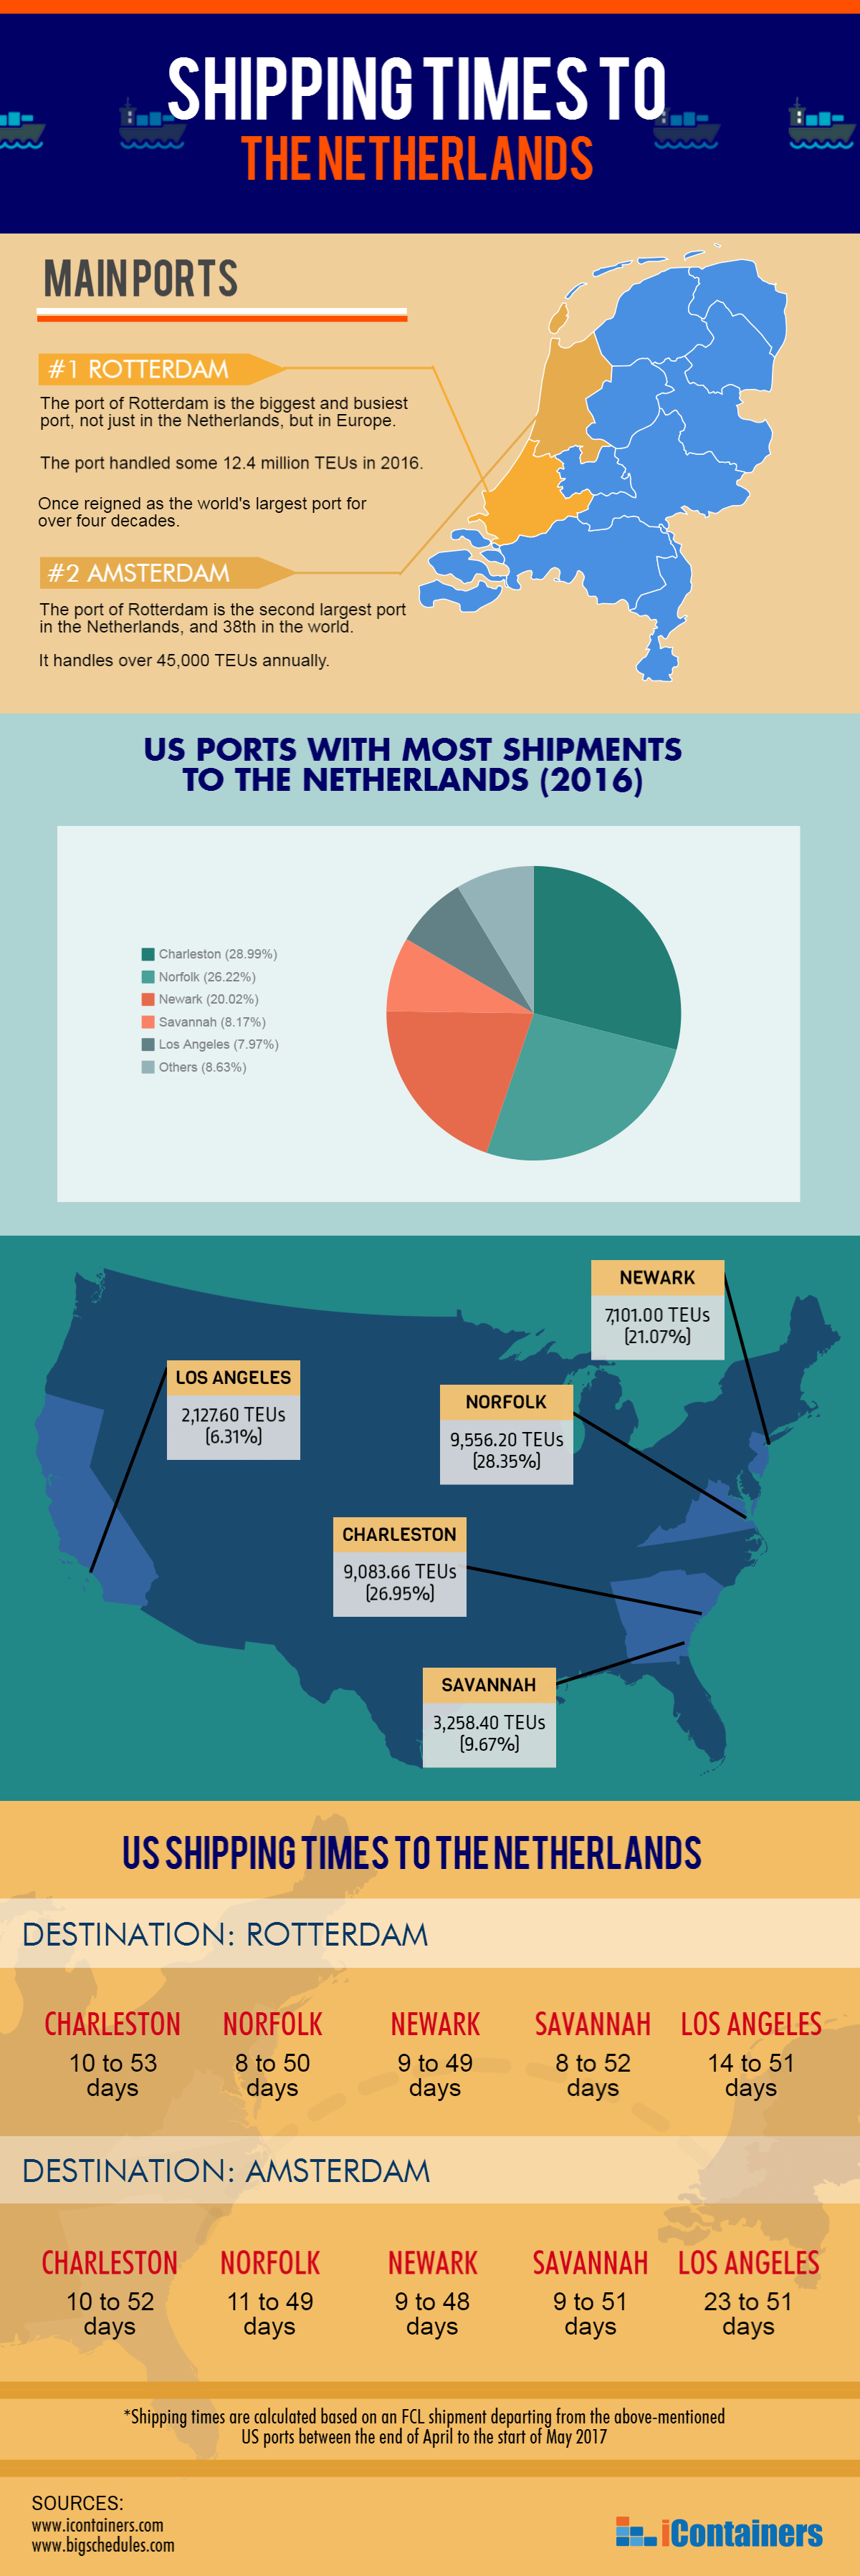 iContainers-US-to-Netherlands-shipping-times-infographic2.png